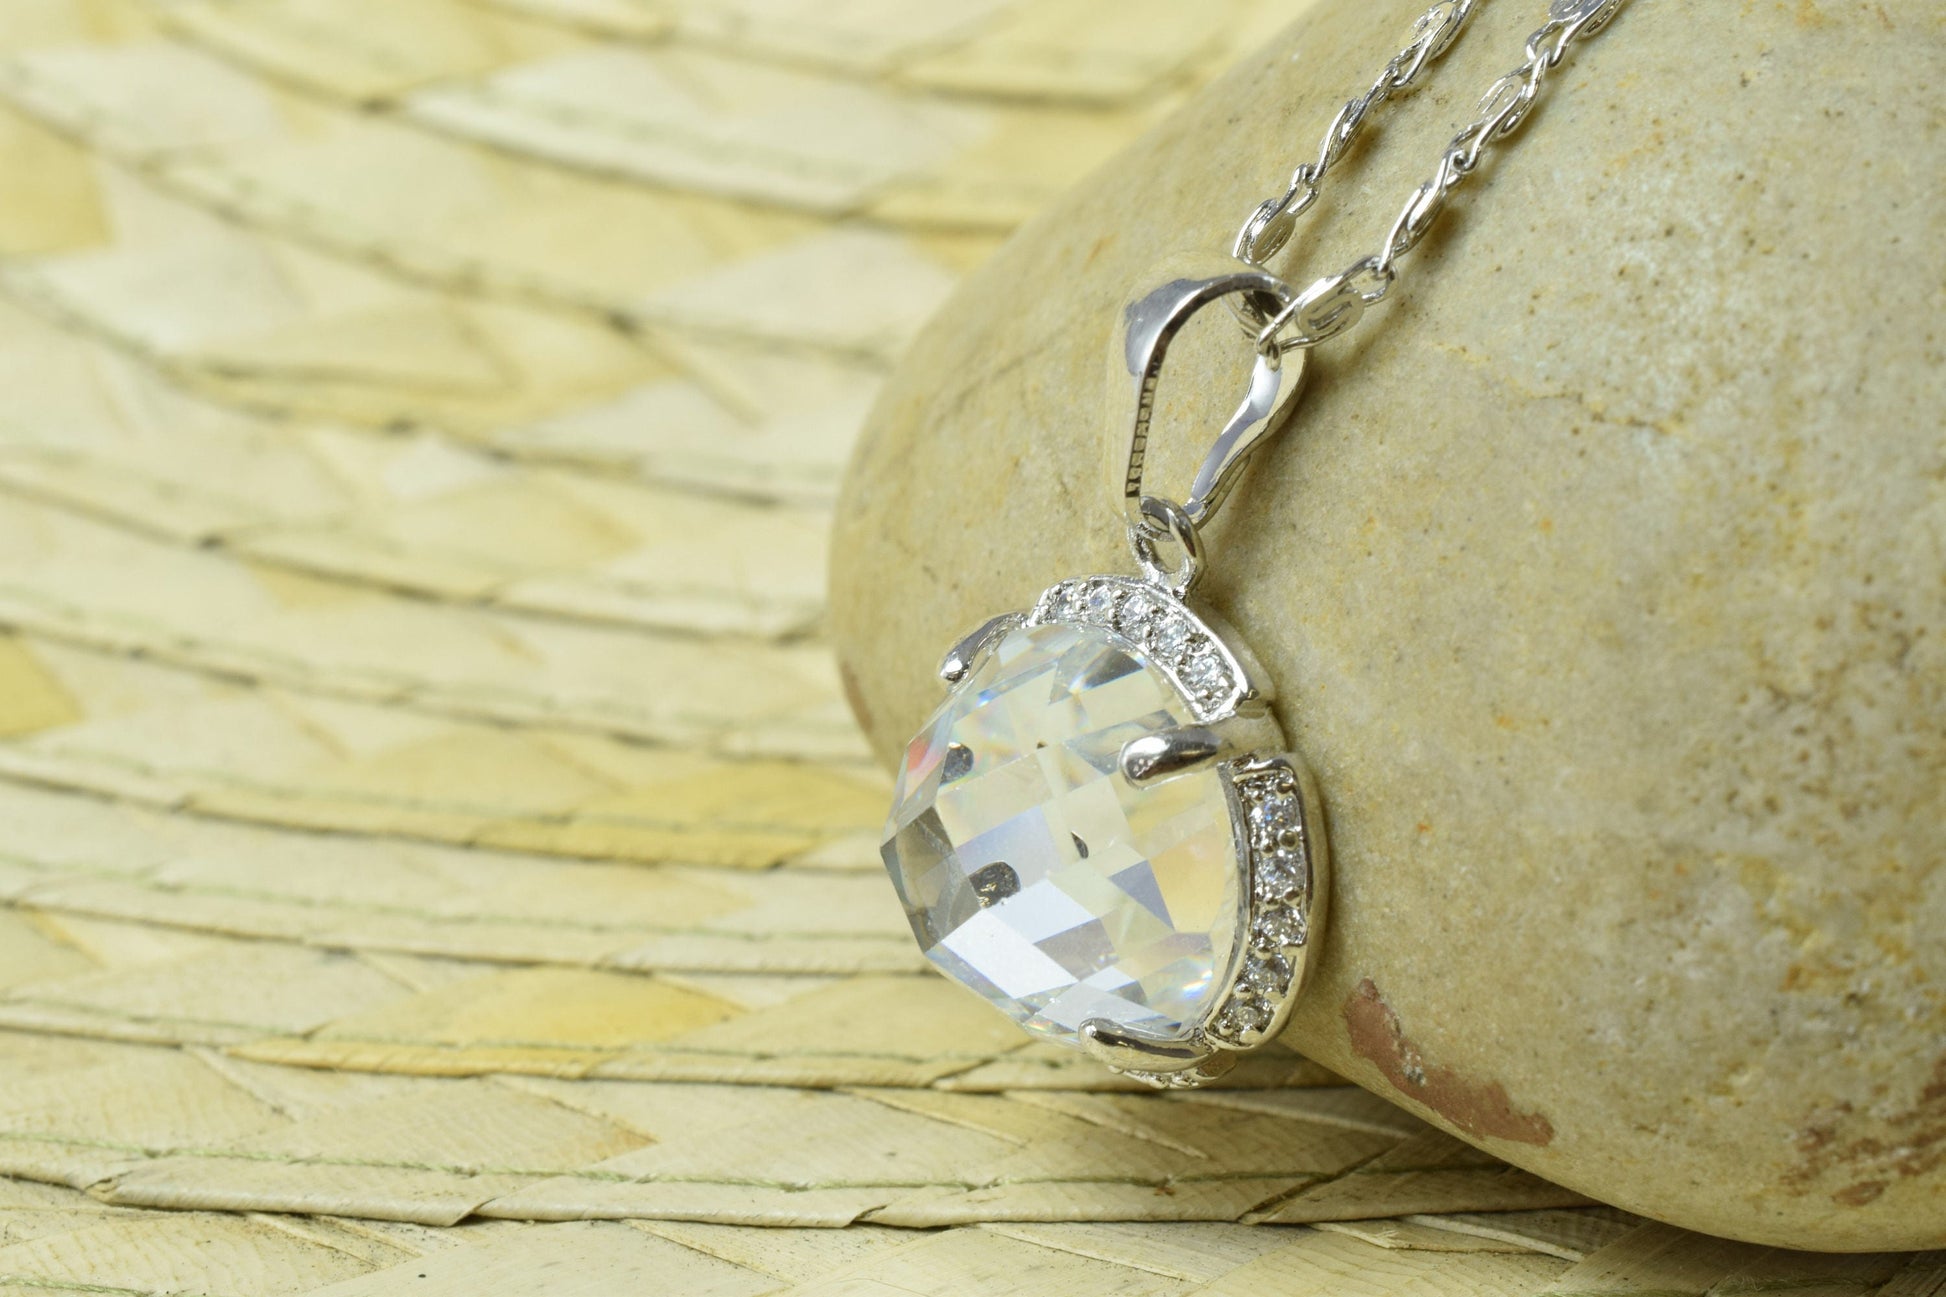 White Gold Filled Bling Bling Pendant Size 19x16mm With CZ Cubic Zirconia Crystal Findings Charm For Jewelry Making